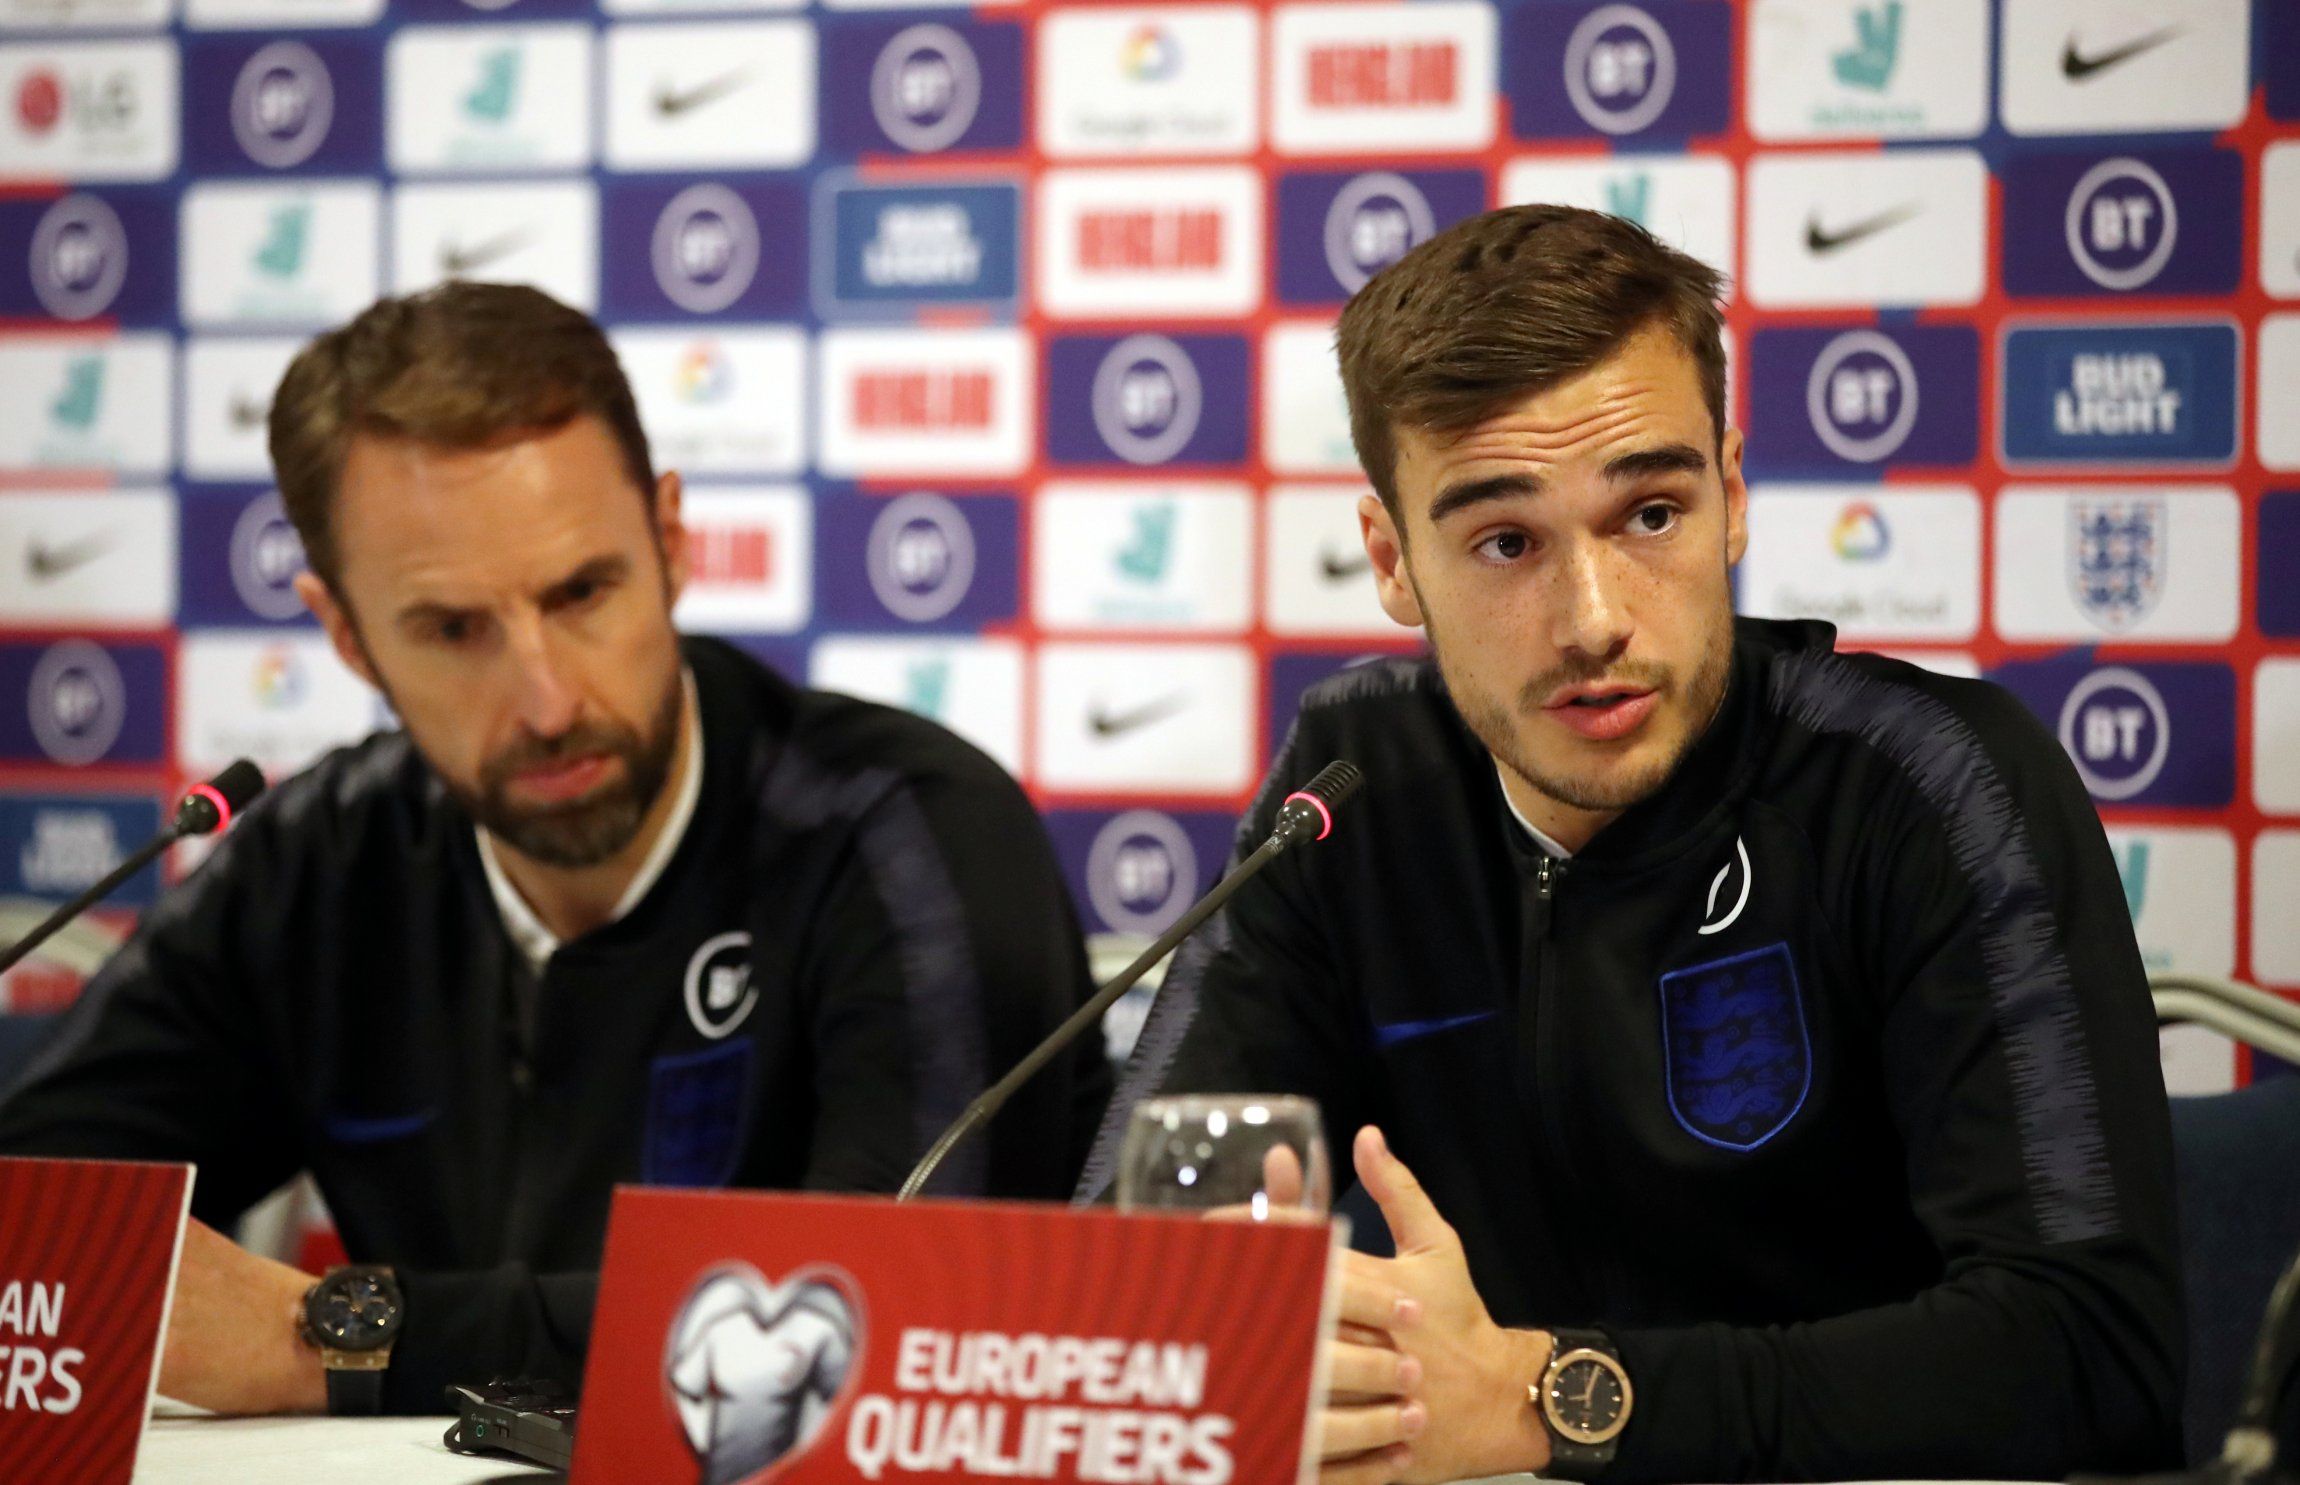 harry-winks-and-gareth-southgate-on-england-press-duties-euro-2020-qualifiers